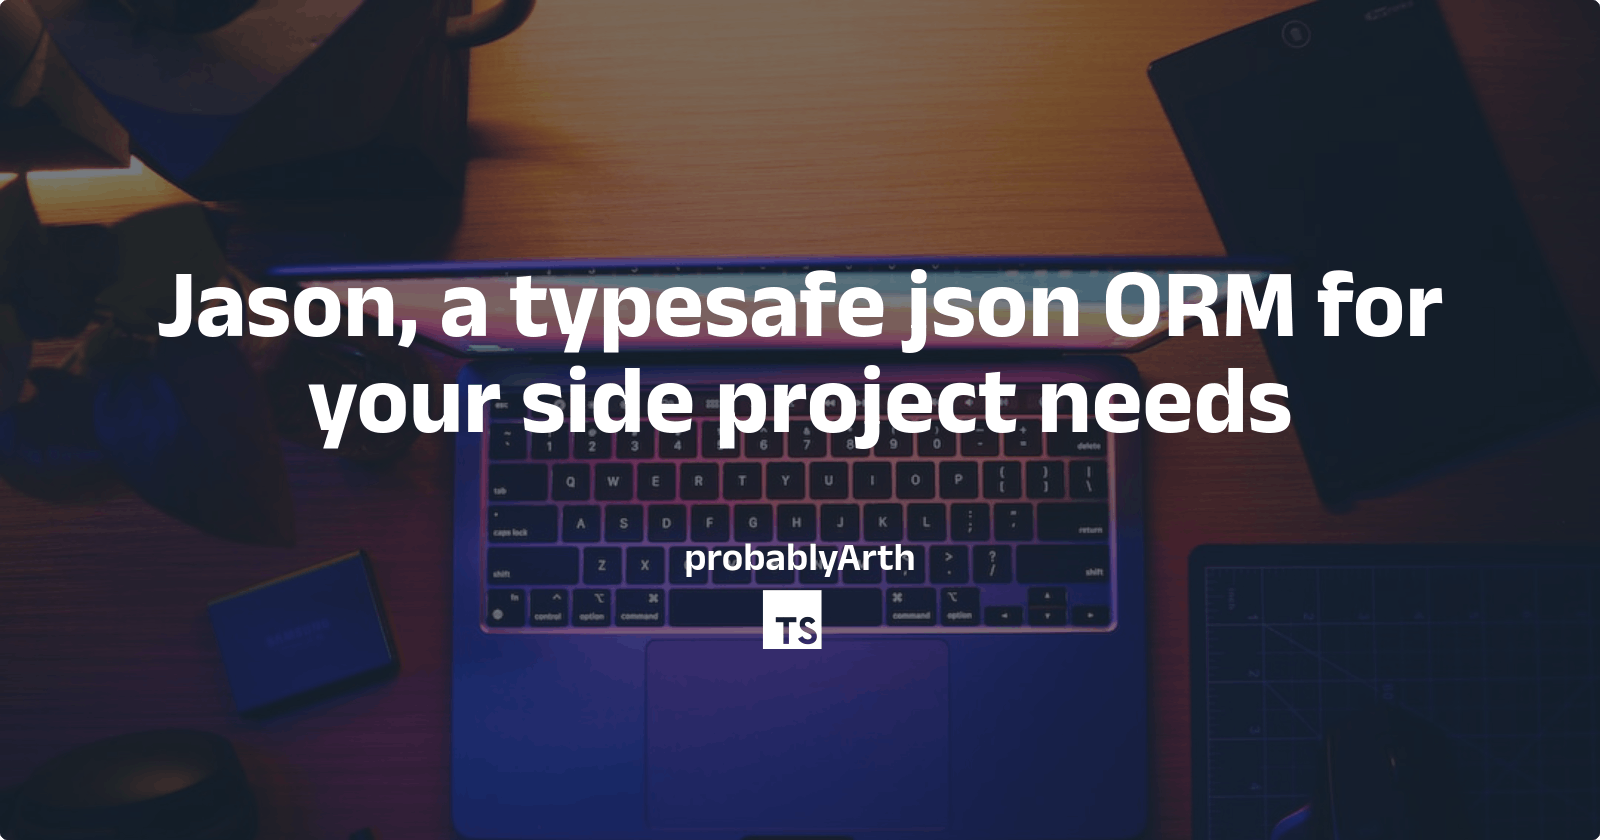 Jason, a simple typesafe JSON ORM for your standalone application needs